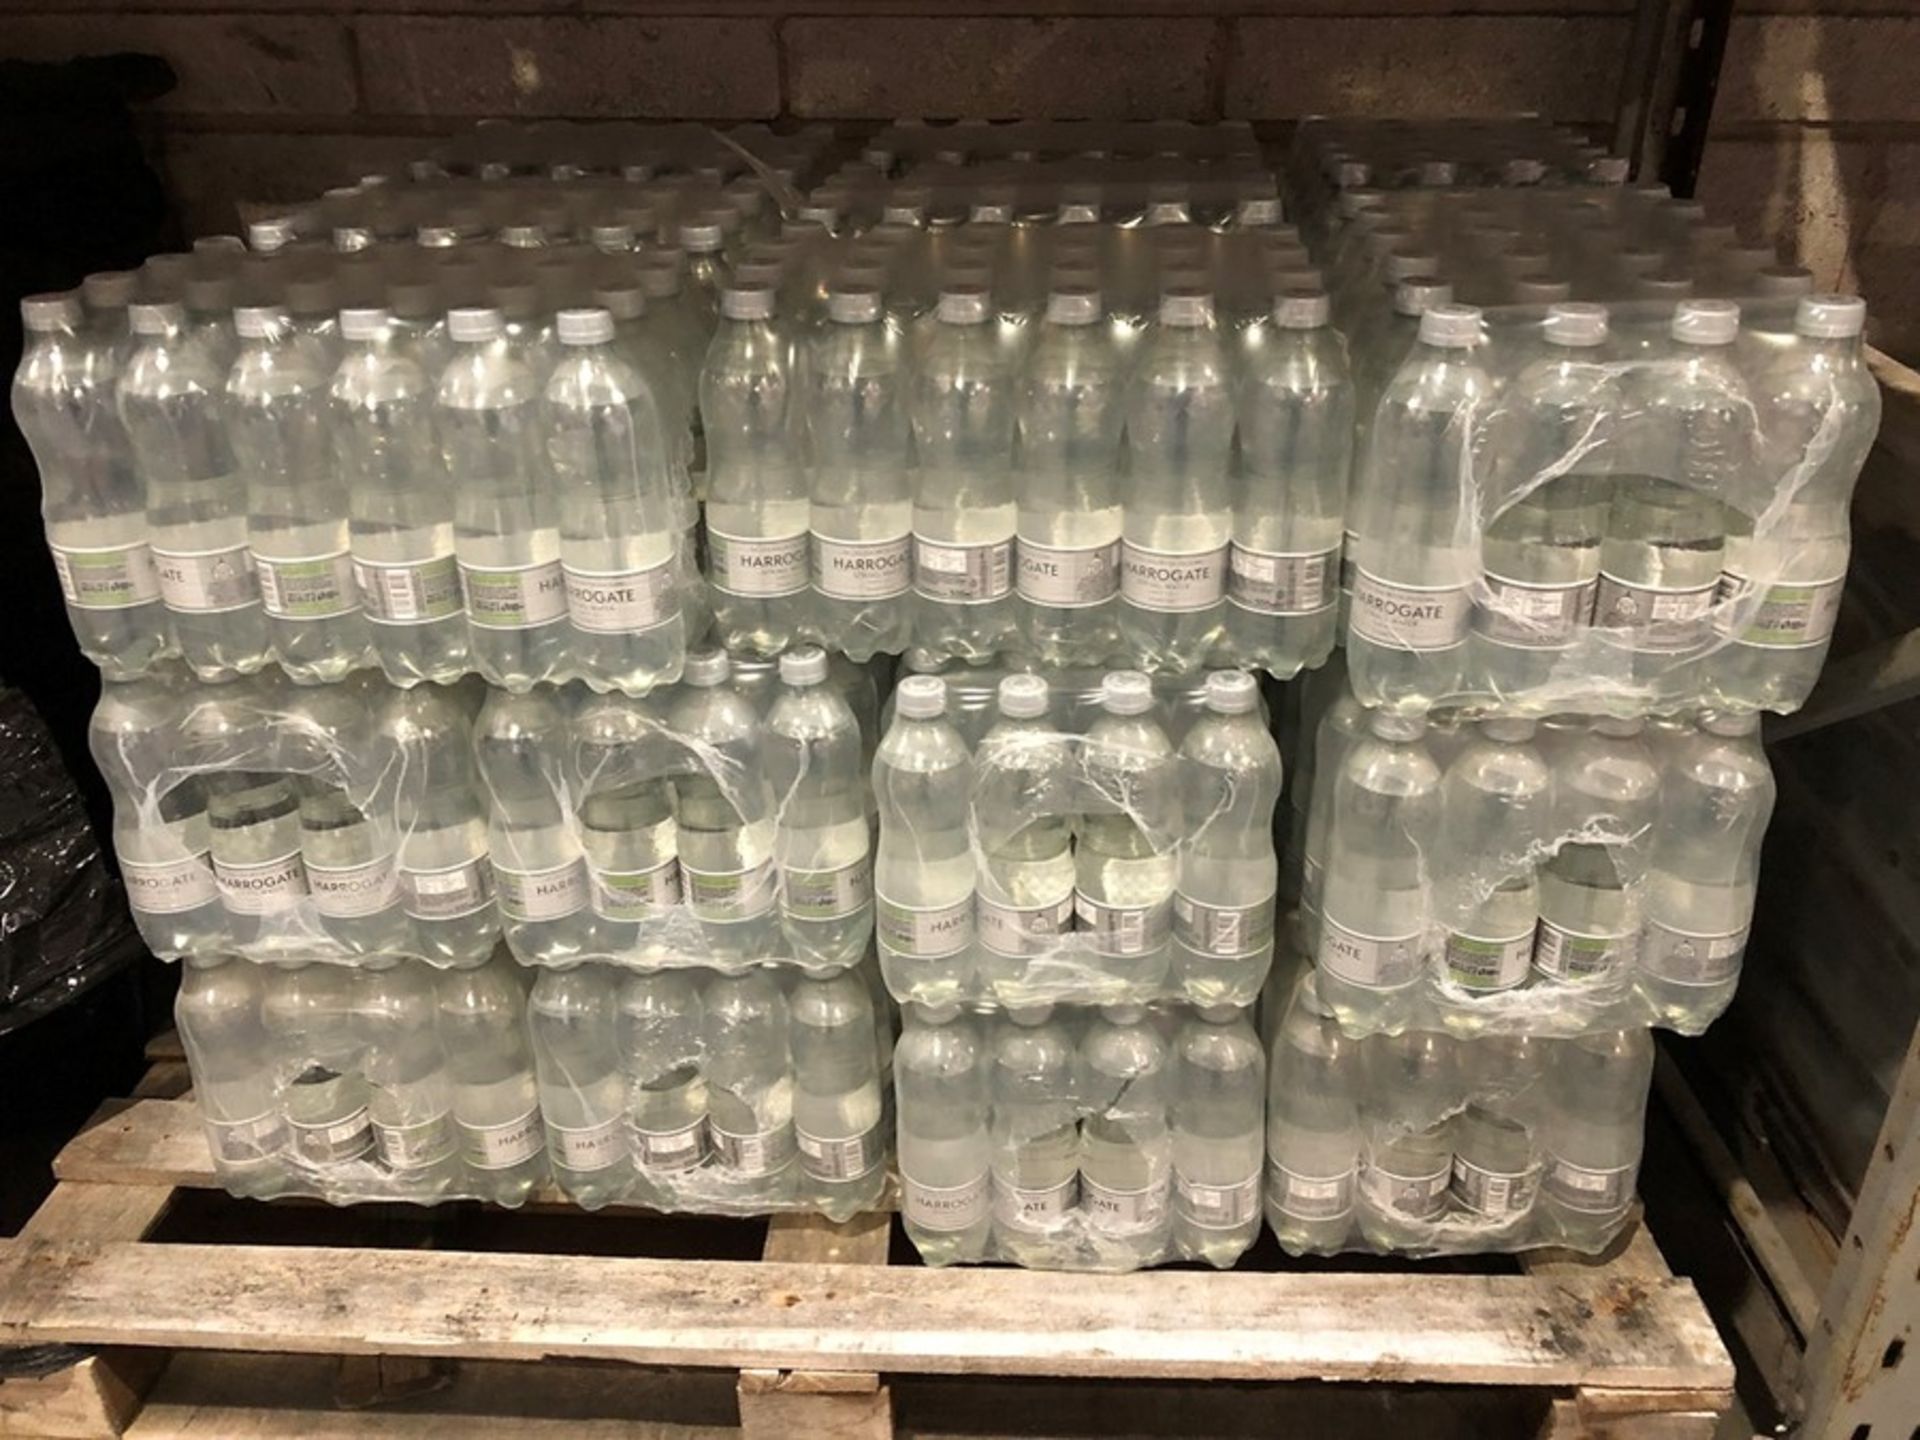 1 LOT TO CONTAIN APPROX 24 PACKS OF HARROGATE SPRING WATER SPARKLING - EACH PACK CONTAINS 24 500ML